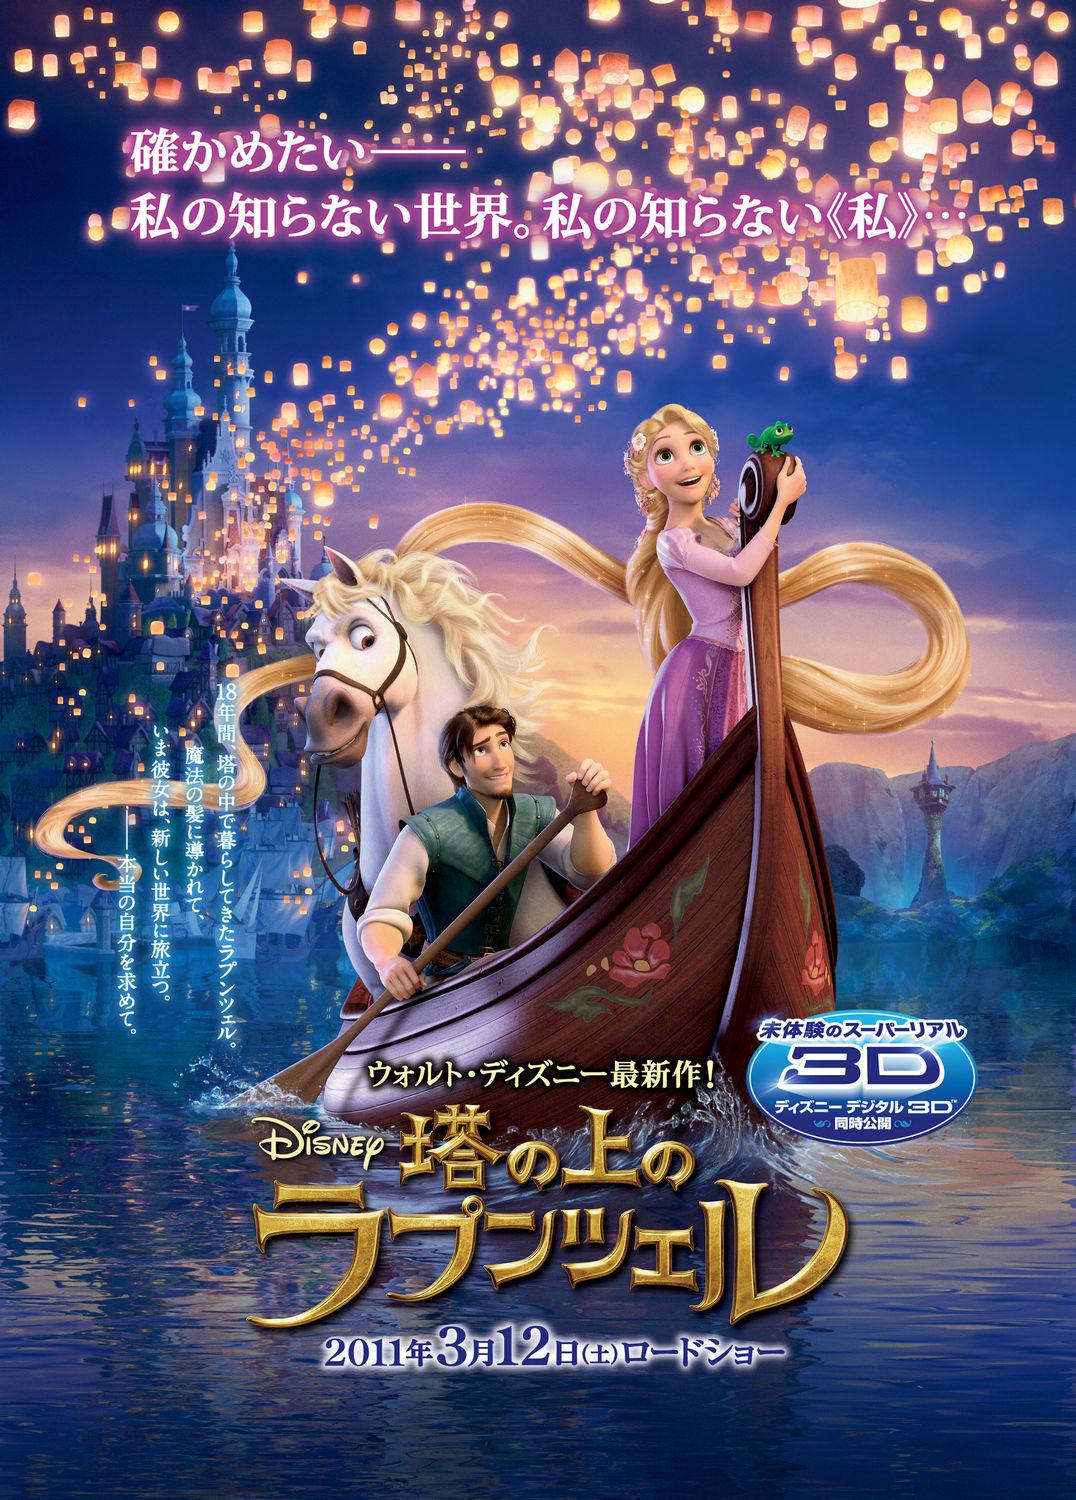 Extra Large Movie Poster Image for Tangled (#4 of 6)